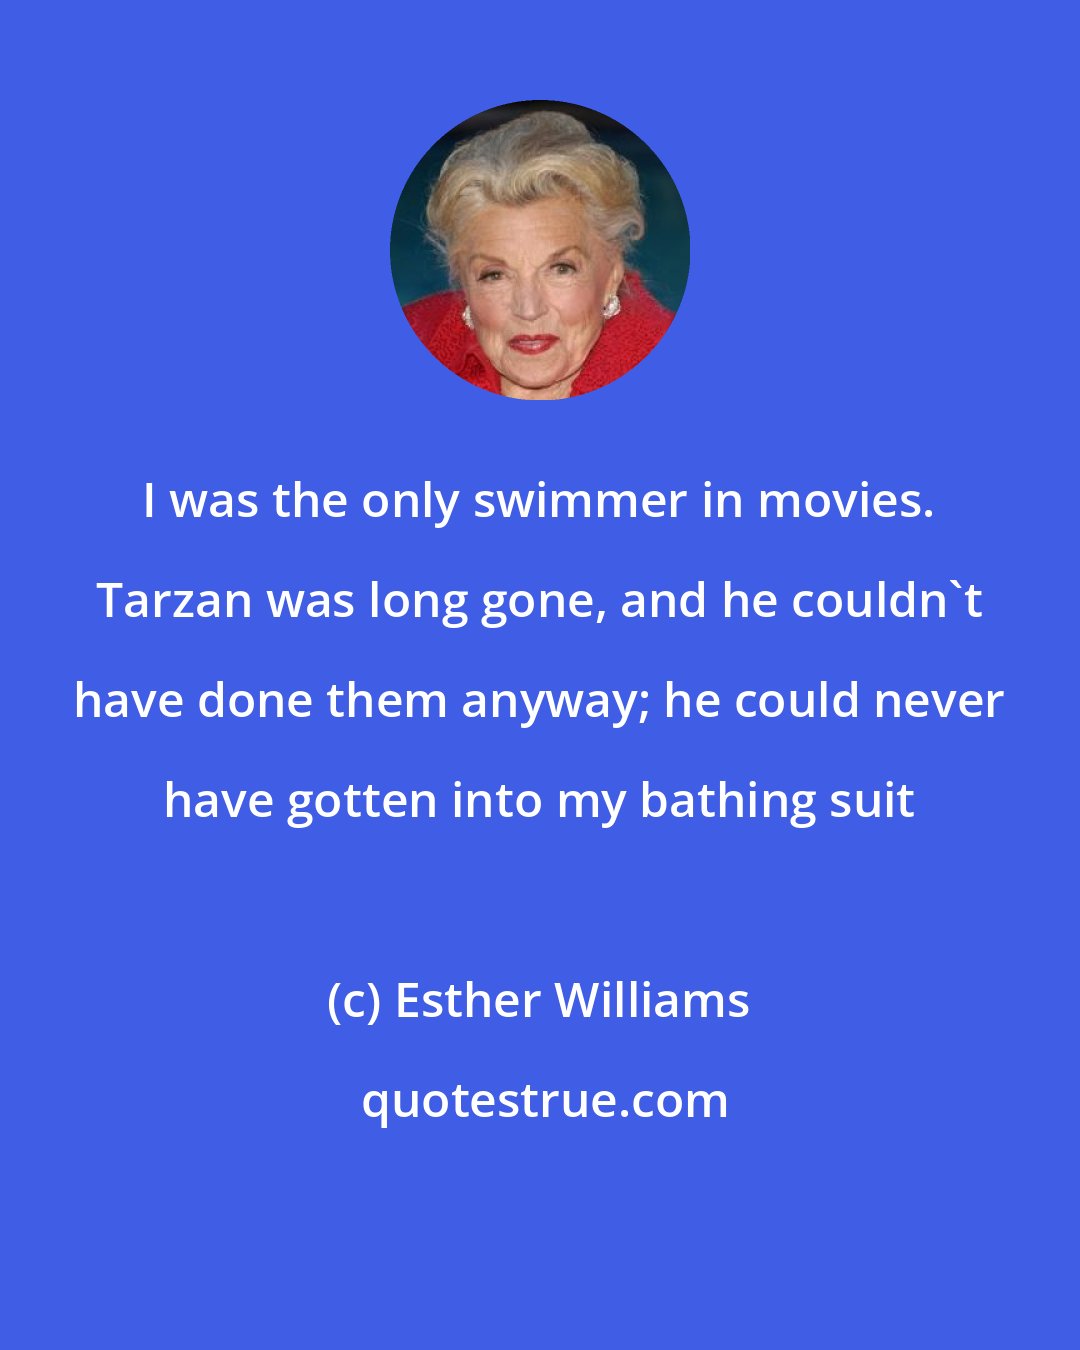 Esther Williams: I was the only swimmer in movies. Tarzan was long gone, and he couldn't have done them anyway; he could never have gotten into my bathing suit